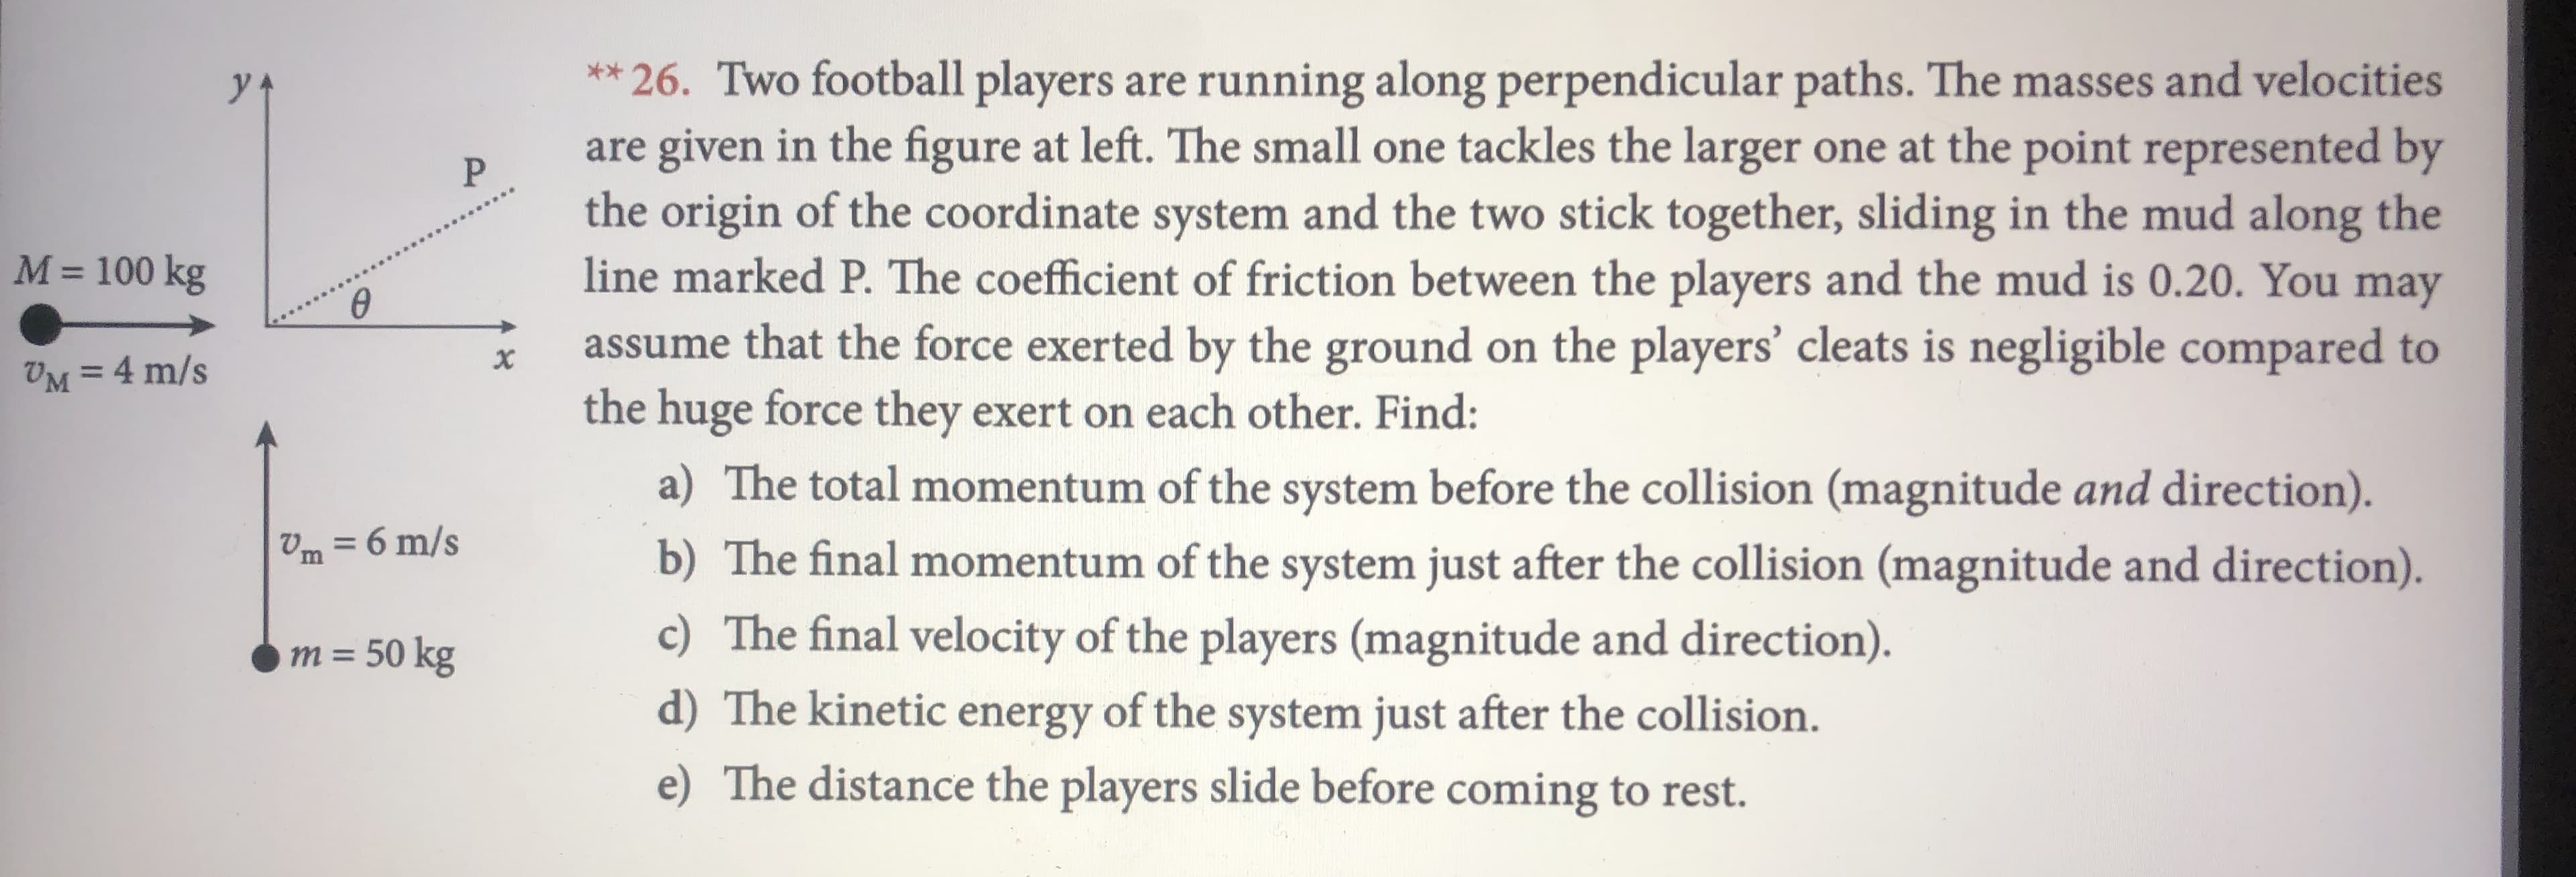 ** 26. Two football players are running along perpendicular paths. The masses and velocities
are given in the figure at left. The small one tackles the larger one at the point represented by
y
P
the origin of the coordinate system and the two stick together, sliding in the mud along the
line marked P. The coefficient of friction between the players and the mud is 0.20. You may
assume that the force exerted by the ground on the players' cleats is negligible compared to
the huge force they exert on each other. Find:
M= 100 kg
VM=4 m/s
a) The total momentum of the system before the collision (magnitude and direction).
Vm =6 m/s
b) The final momentum of the system just after the collision (magnitude and direction).
c) The final velocity of the players (magnitude and direction).
m = 50 kg
d) The kinetic energy of the system just after the collision.
e) The distance the players slide before coming to rest.
